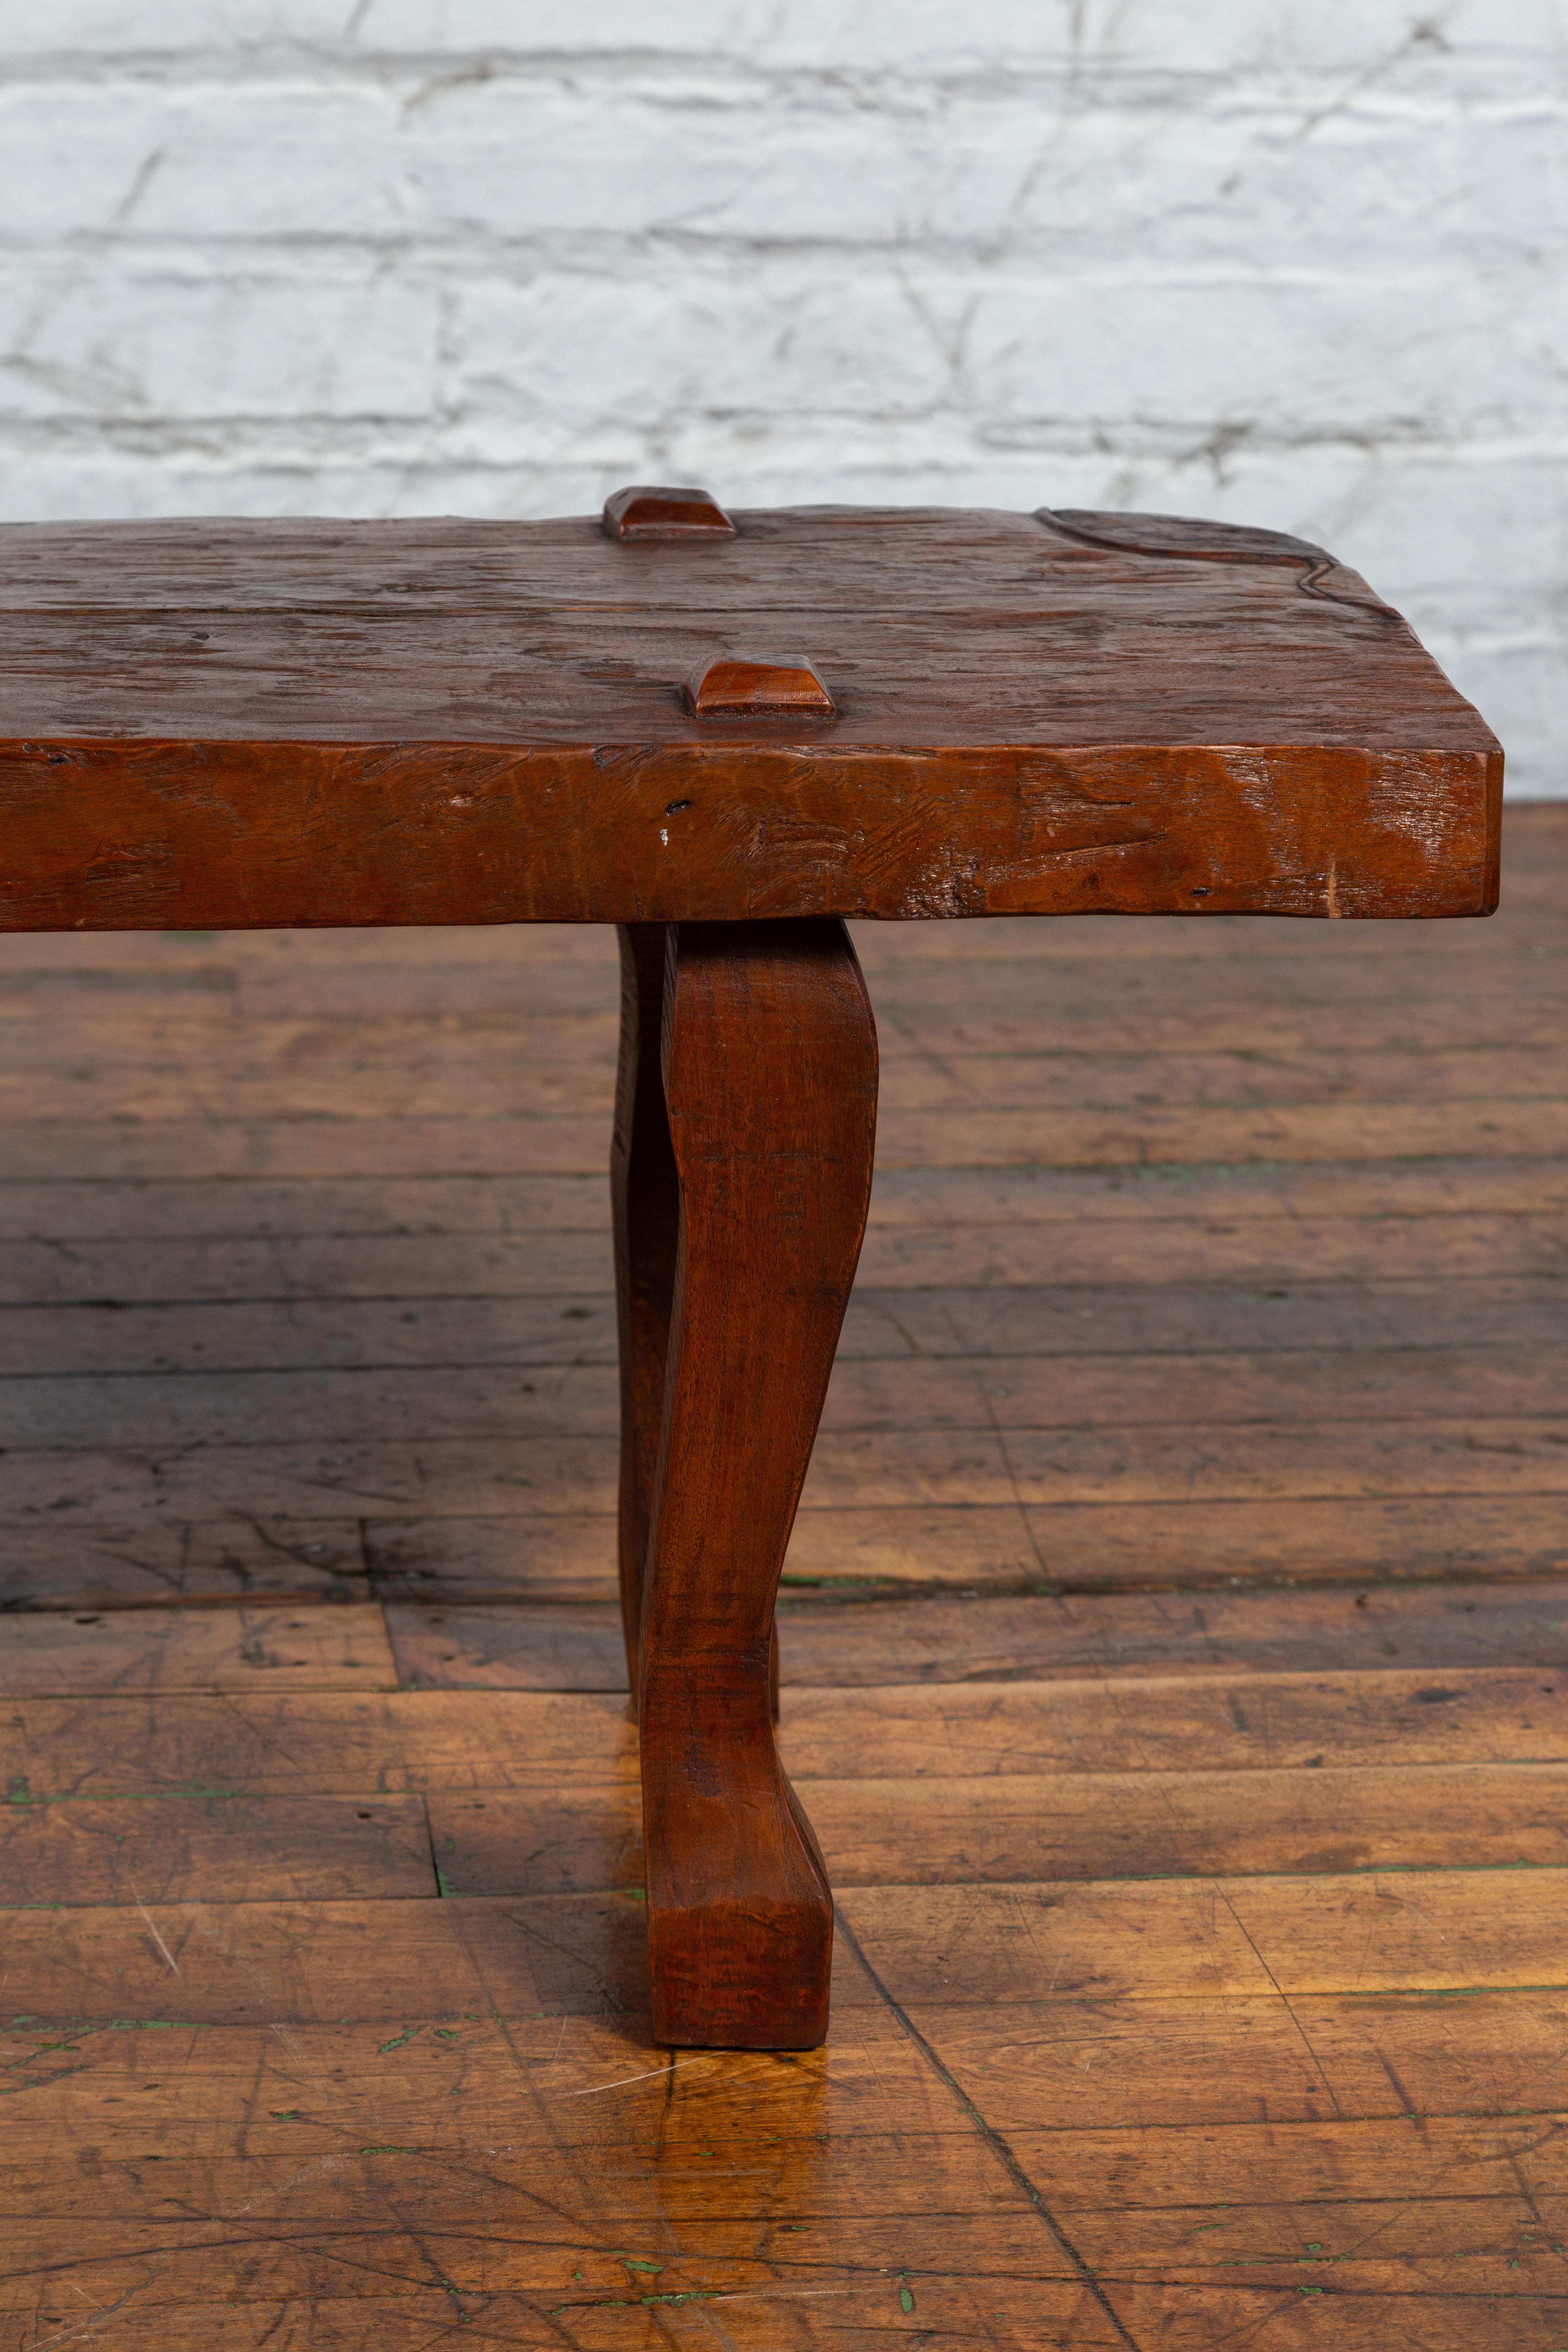 Javanese Arts & Crafts Teak Table with Recessed Legs and Distressed Appearance 2